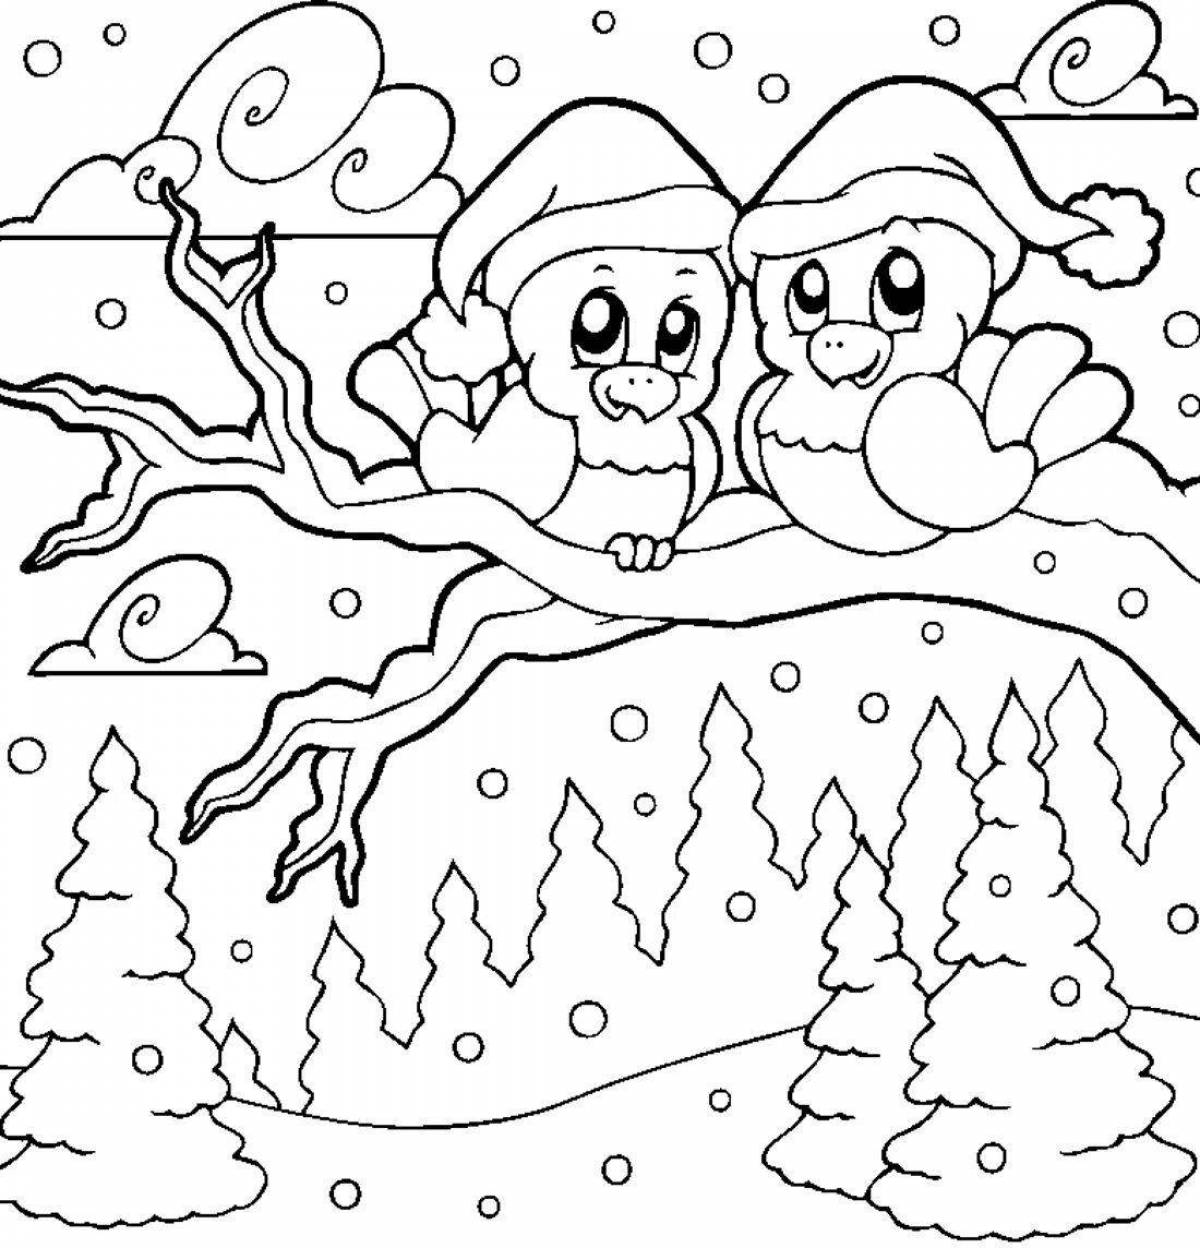 A fascinating coloring book winter forest for children 4-5 years old